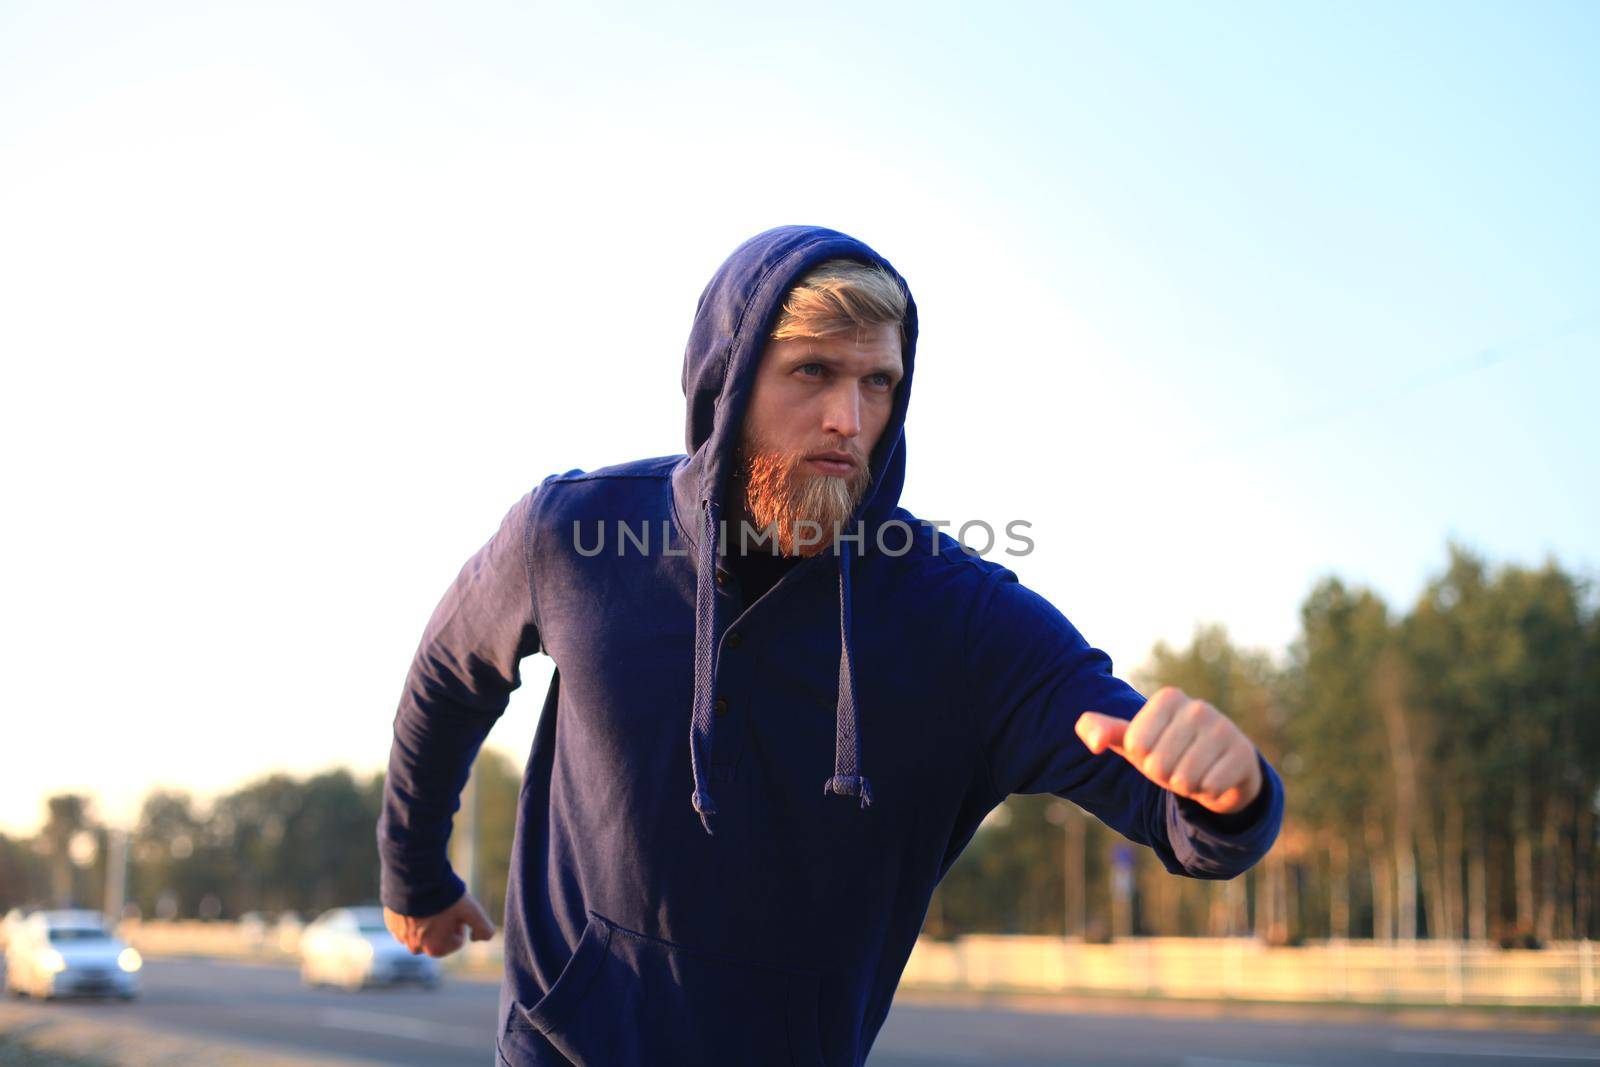 Fit athlete. Handsome adult man running outdoors to stay healthy, at sunset or sunrise. Runner